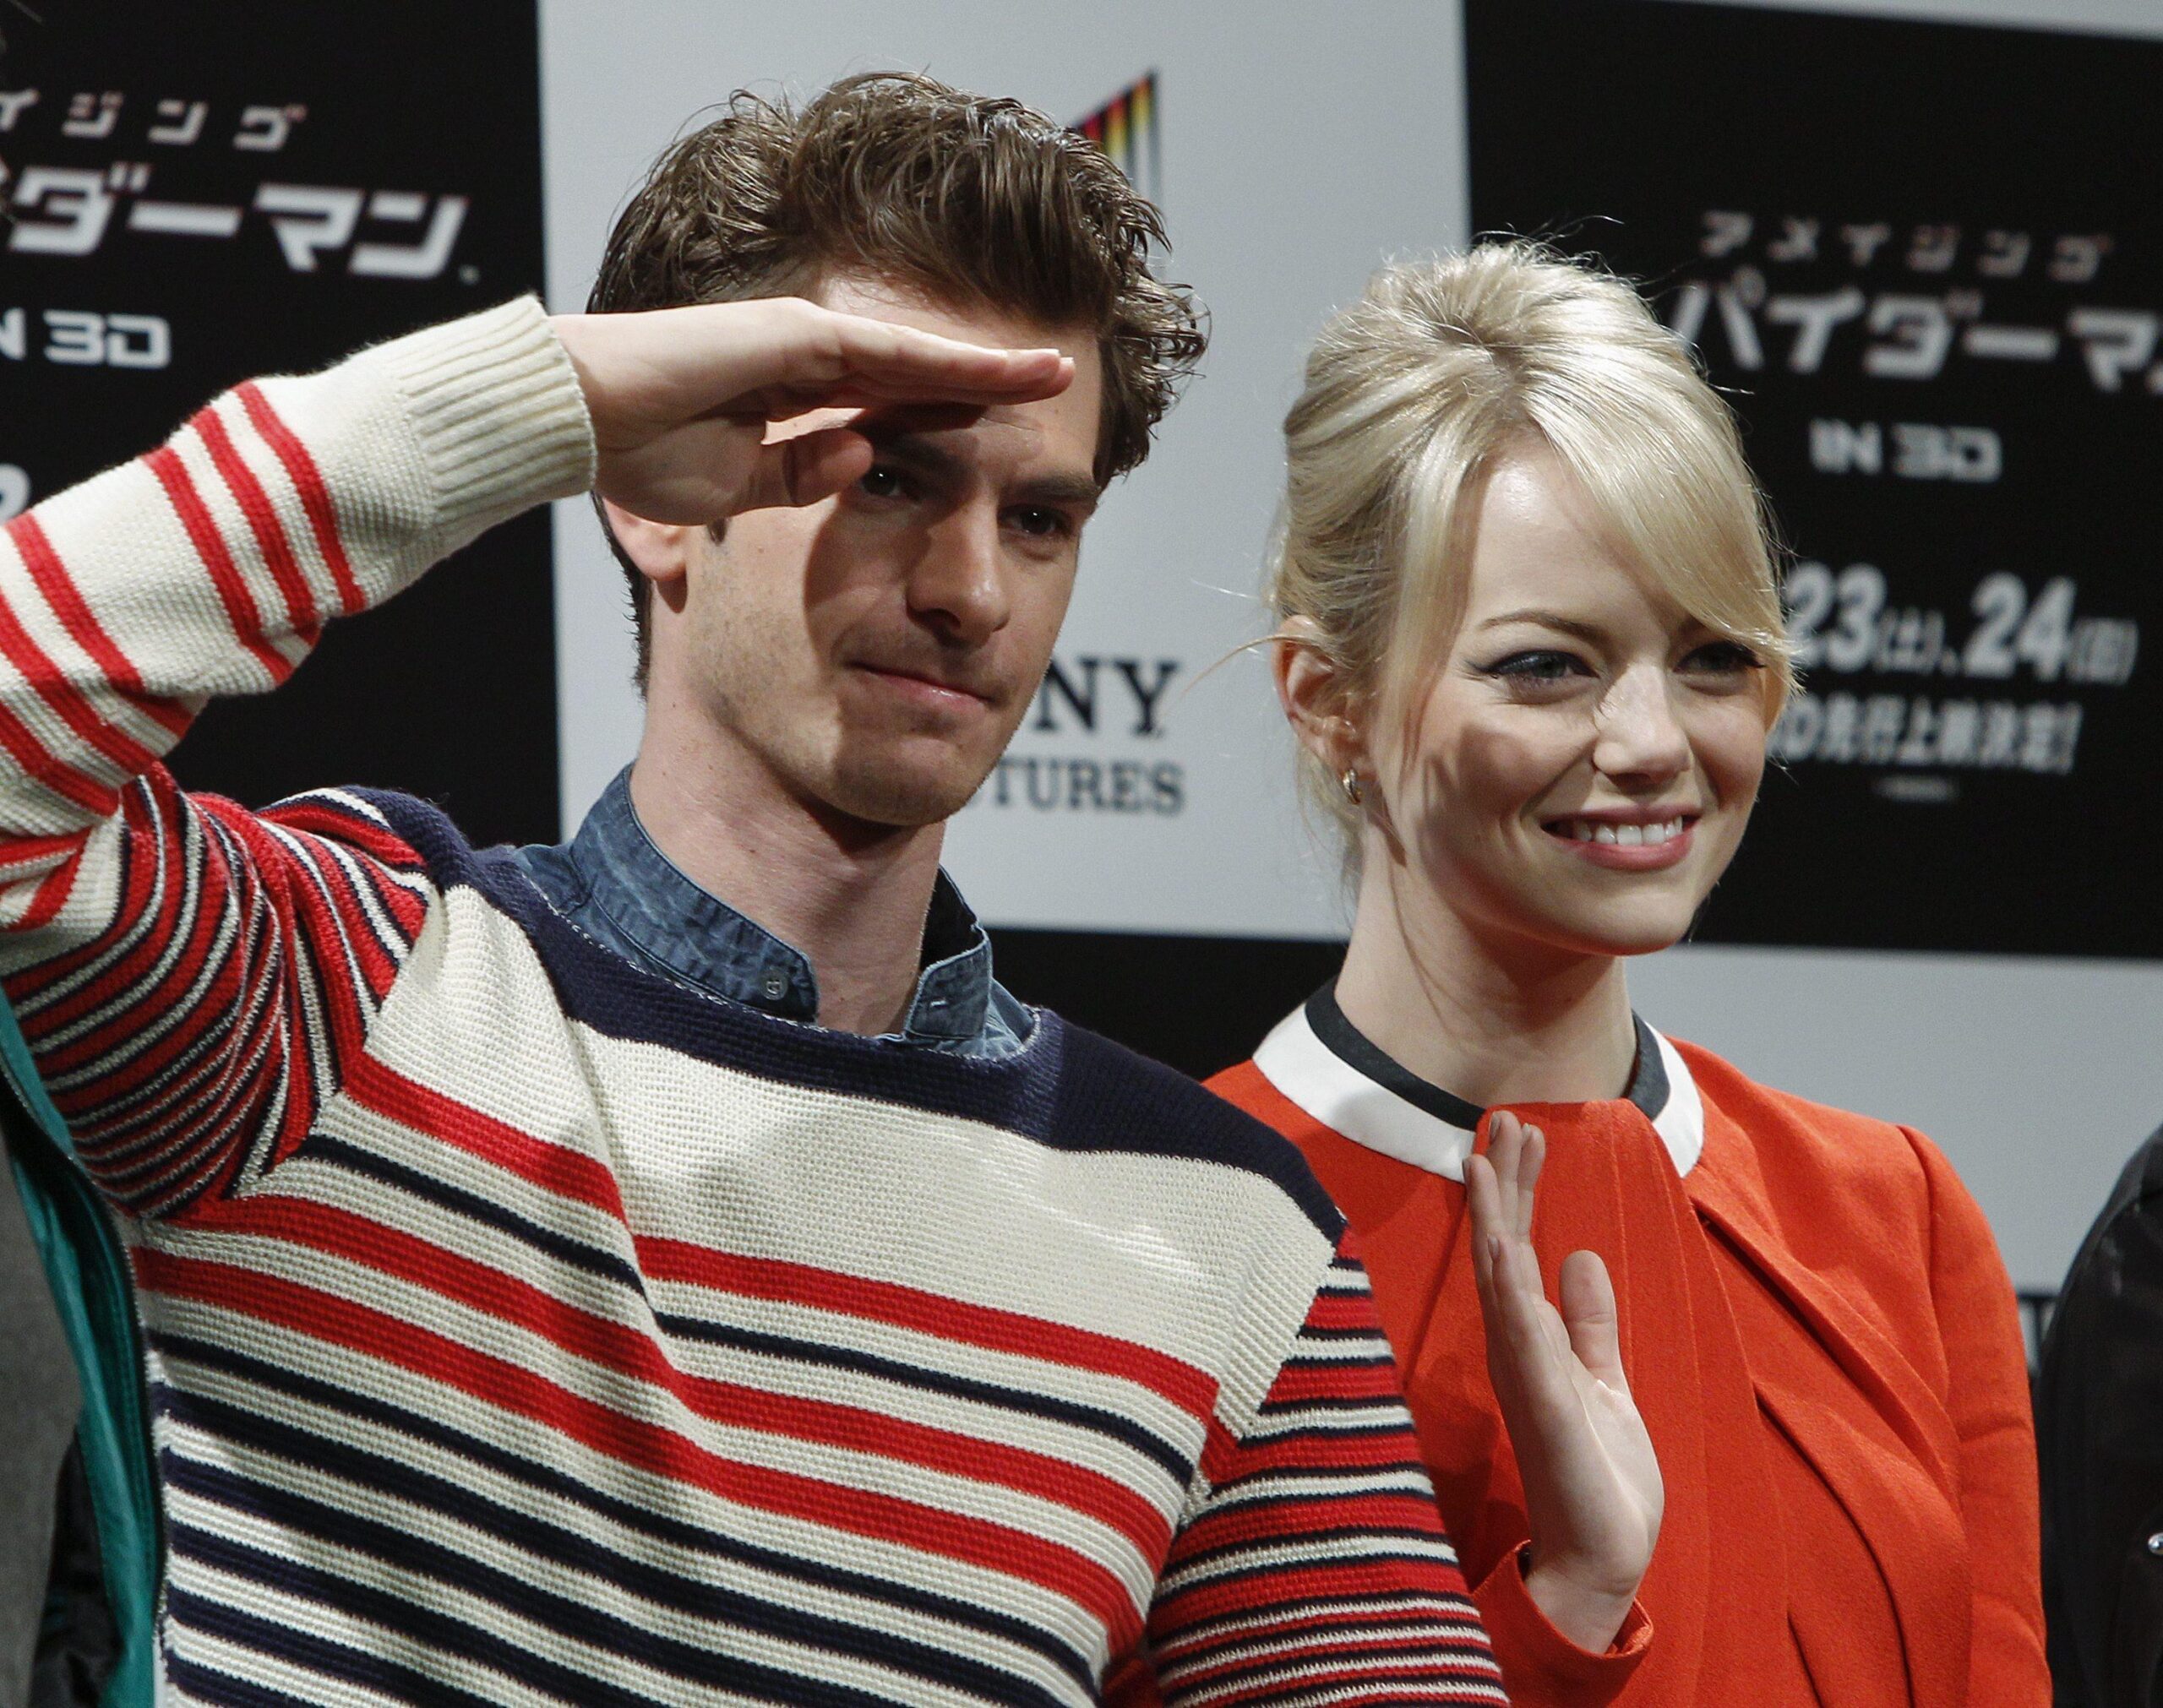 The Amazing Spiderman promotion campaign in Tokyo02